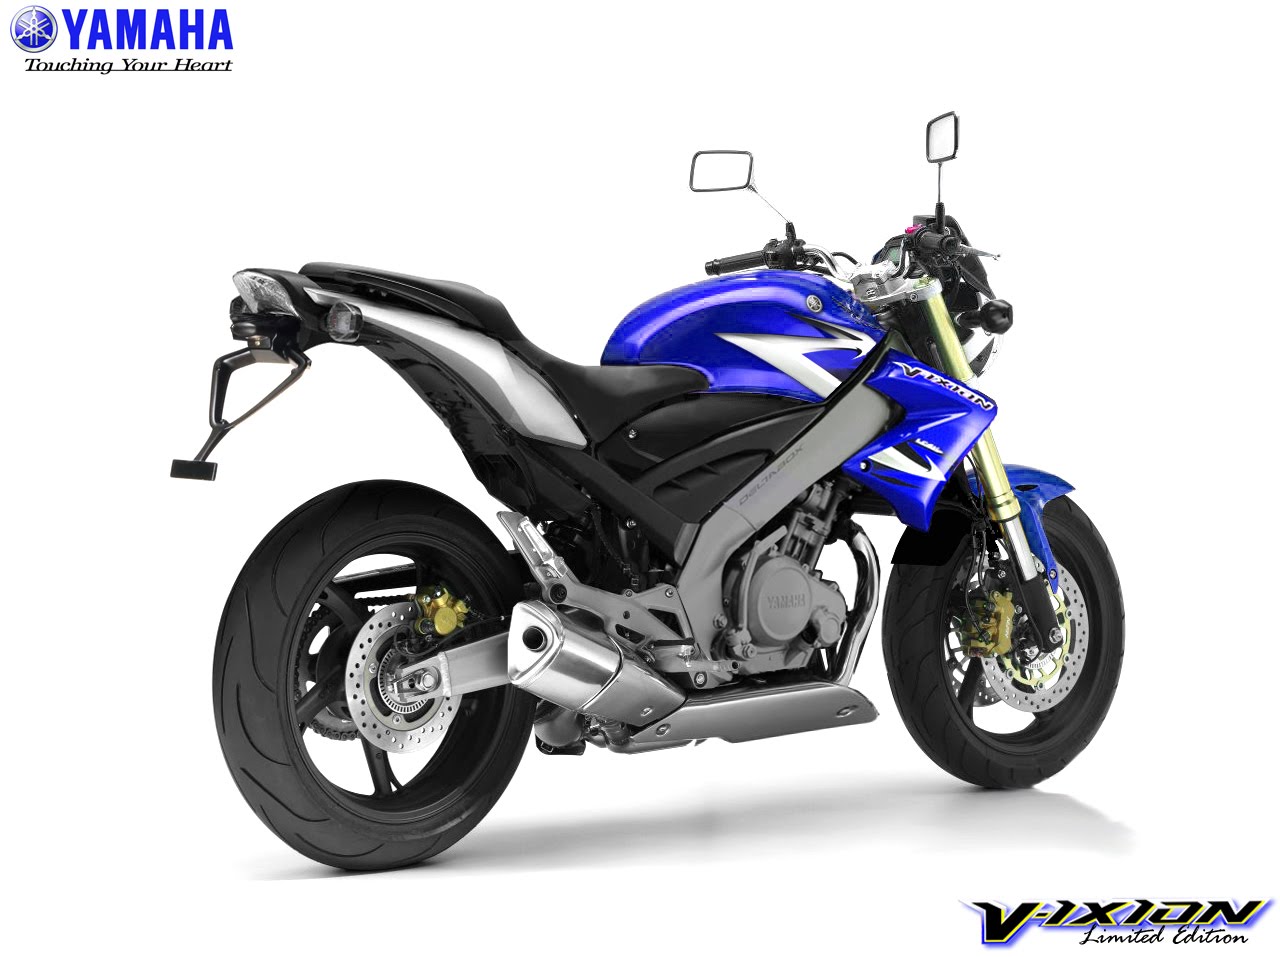 YAMAHA VIXION Limited EDITION - motor modif contest | trend motorcycle ...